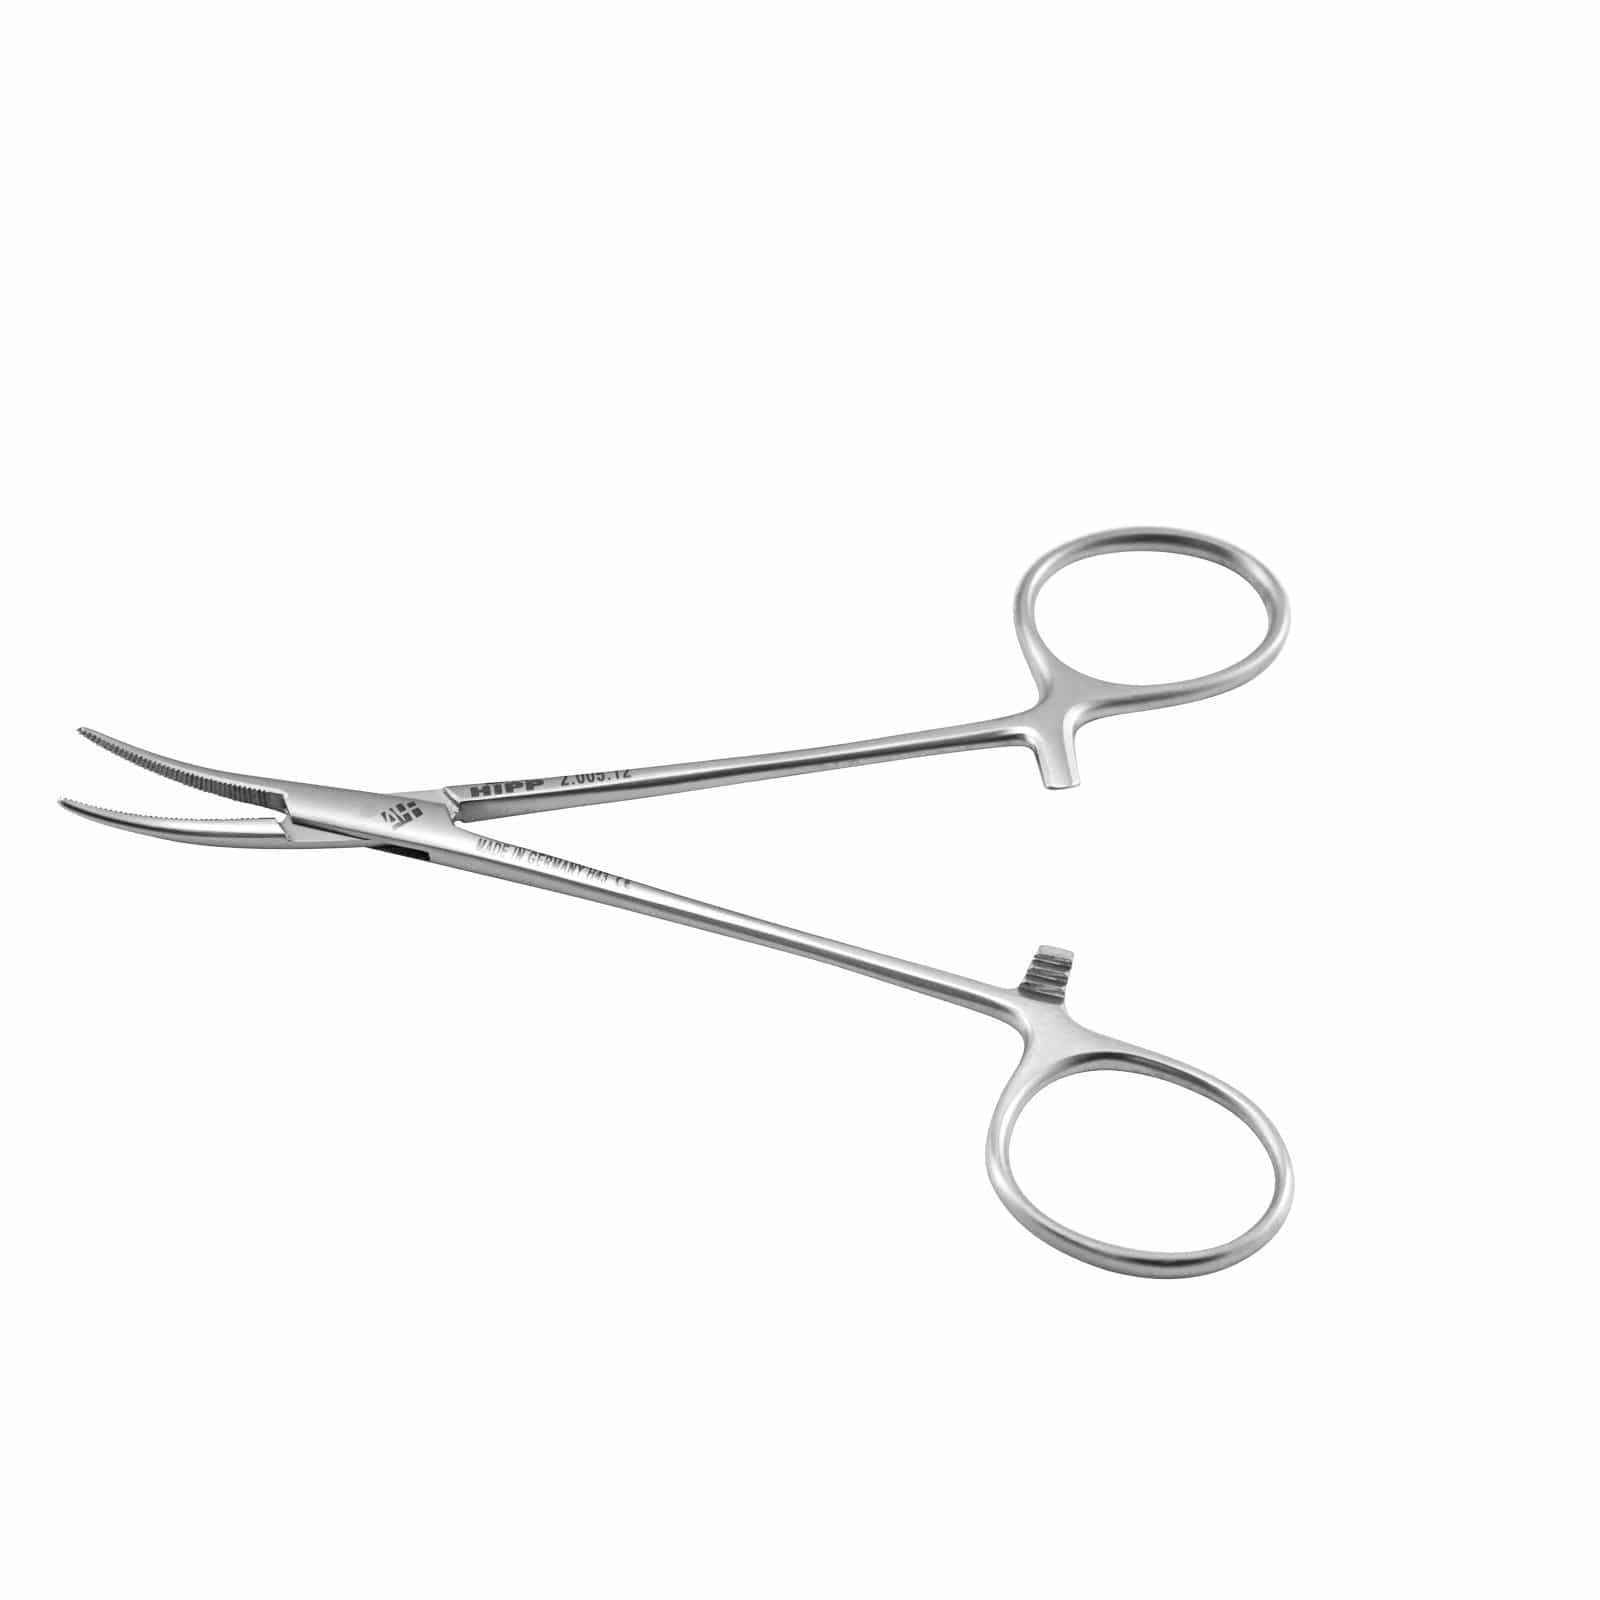 Hipp Surgical Instruments 12.5cm / Curved / Standard Hipp Halsted Mosquito Forceps